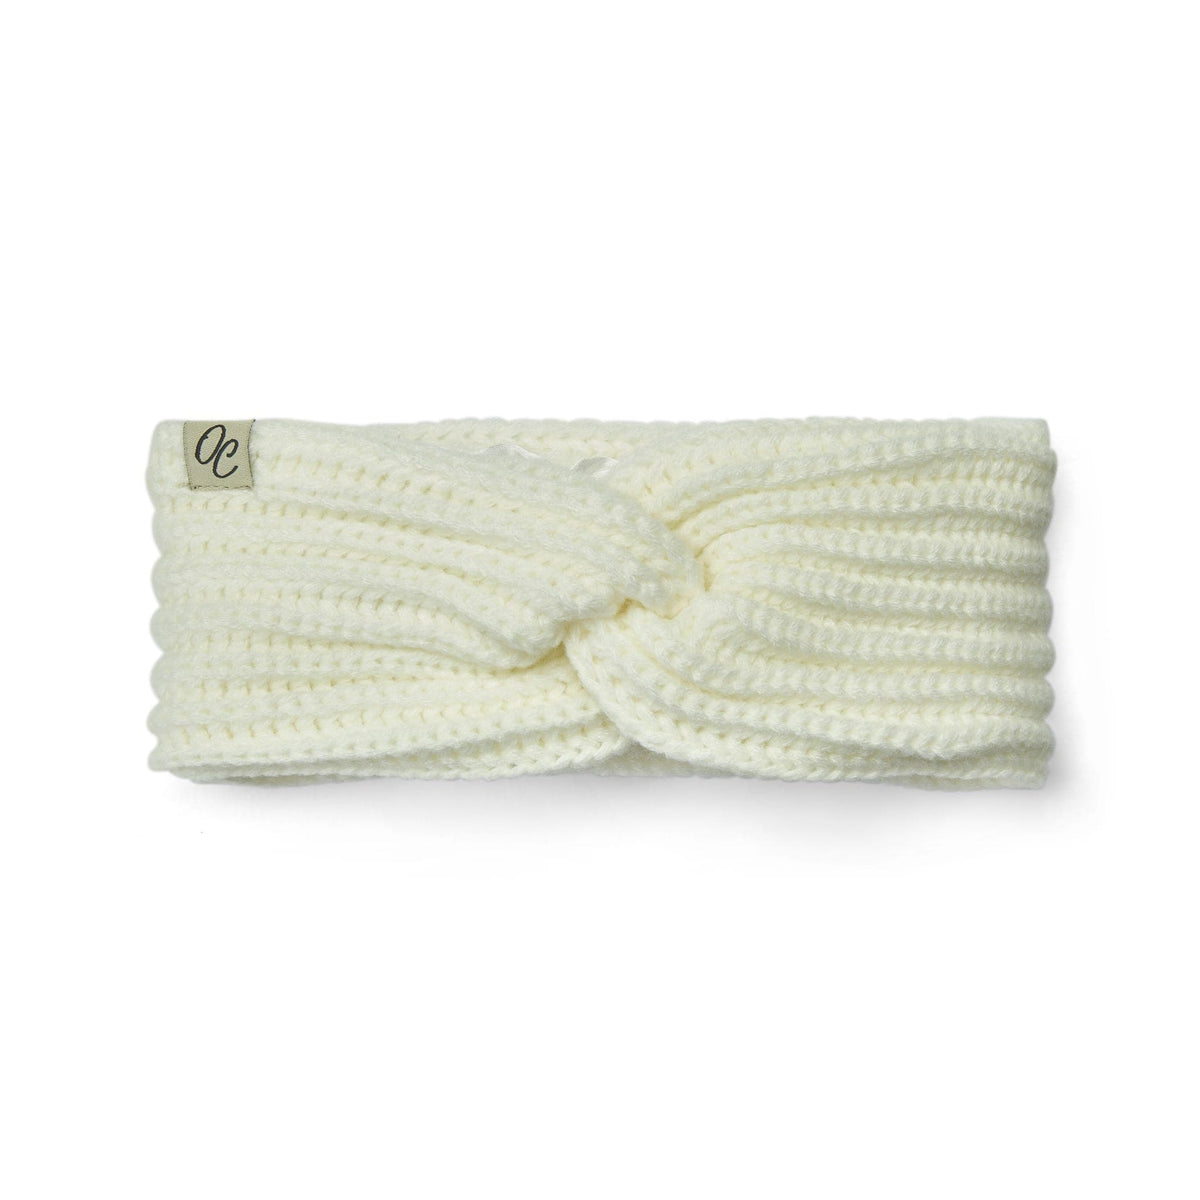 Only Curls Satin Lined Knitted Headband - Cream - Only Curls